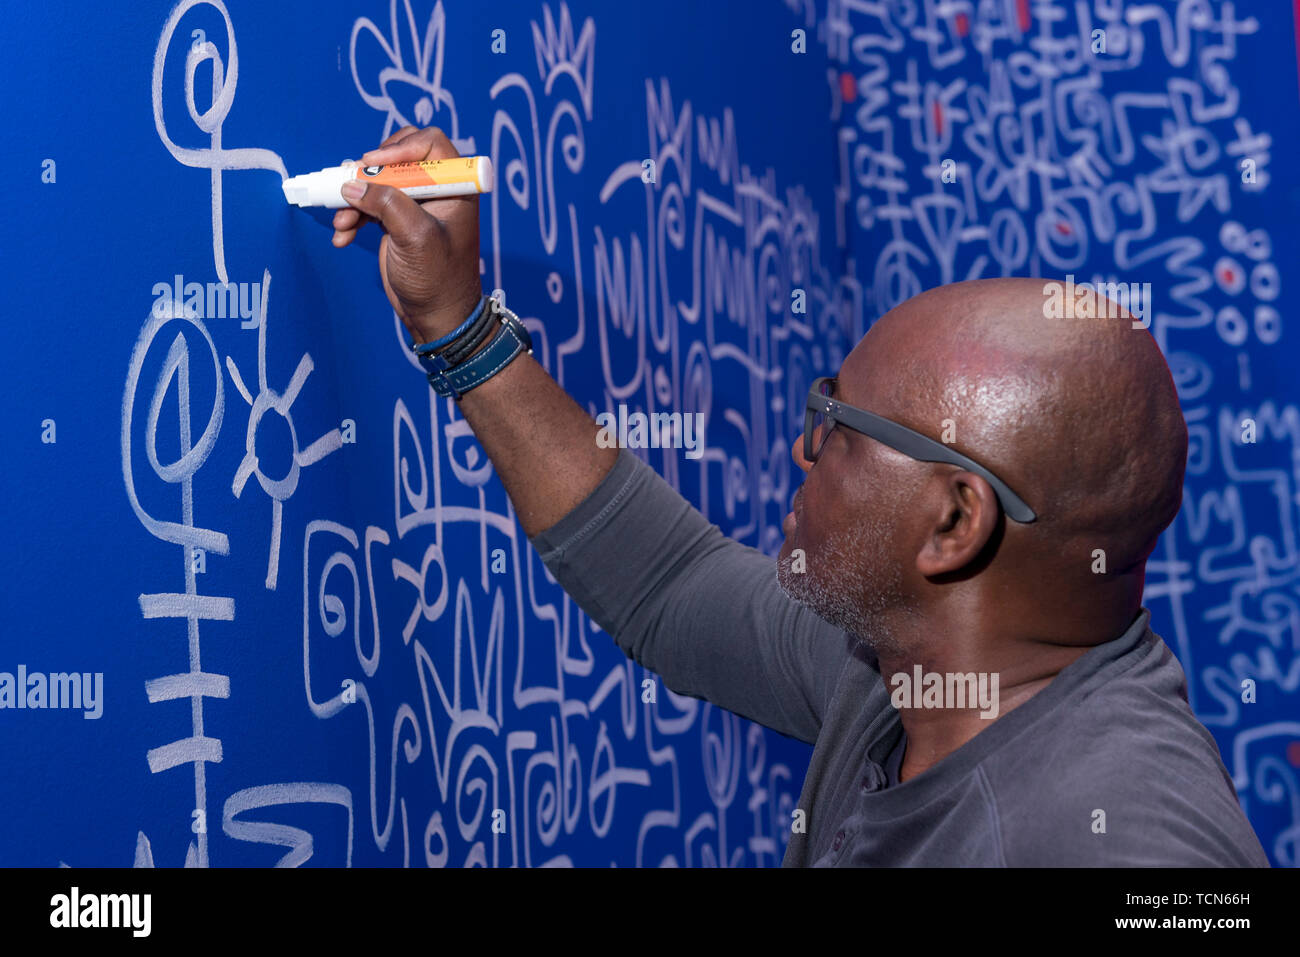 London, UK. 9 June 2019.  Nigerian-American artist, Victor Ekpuk, makes the final touches to his large-scale Afrofuturisrtic mural, 'Shrine to Wisdom, ahead of the opening of a major new exhibition 'Get up, Stand Up Now' at Somerset House which runs 12 June to 15 September 2019.  The exhibition celebrates over 50 years of Black creativity in Britain and beyond, showcasing works by over 100 artists. Credit: Stephen Chung / Alamy Live News Stock Photo